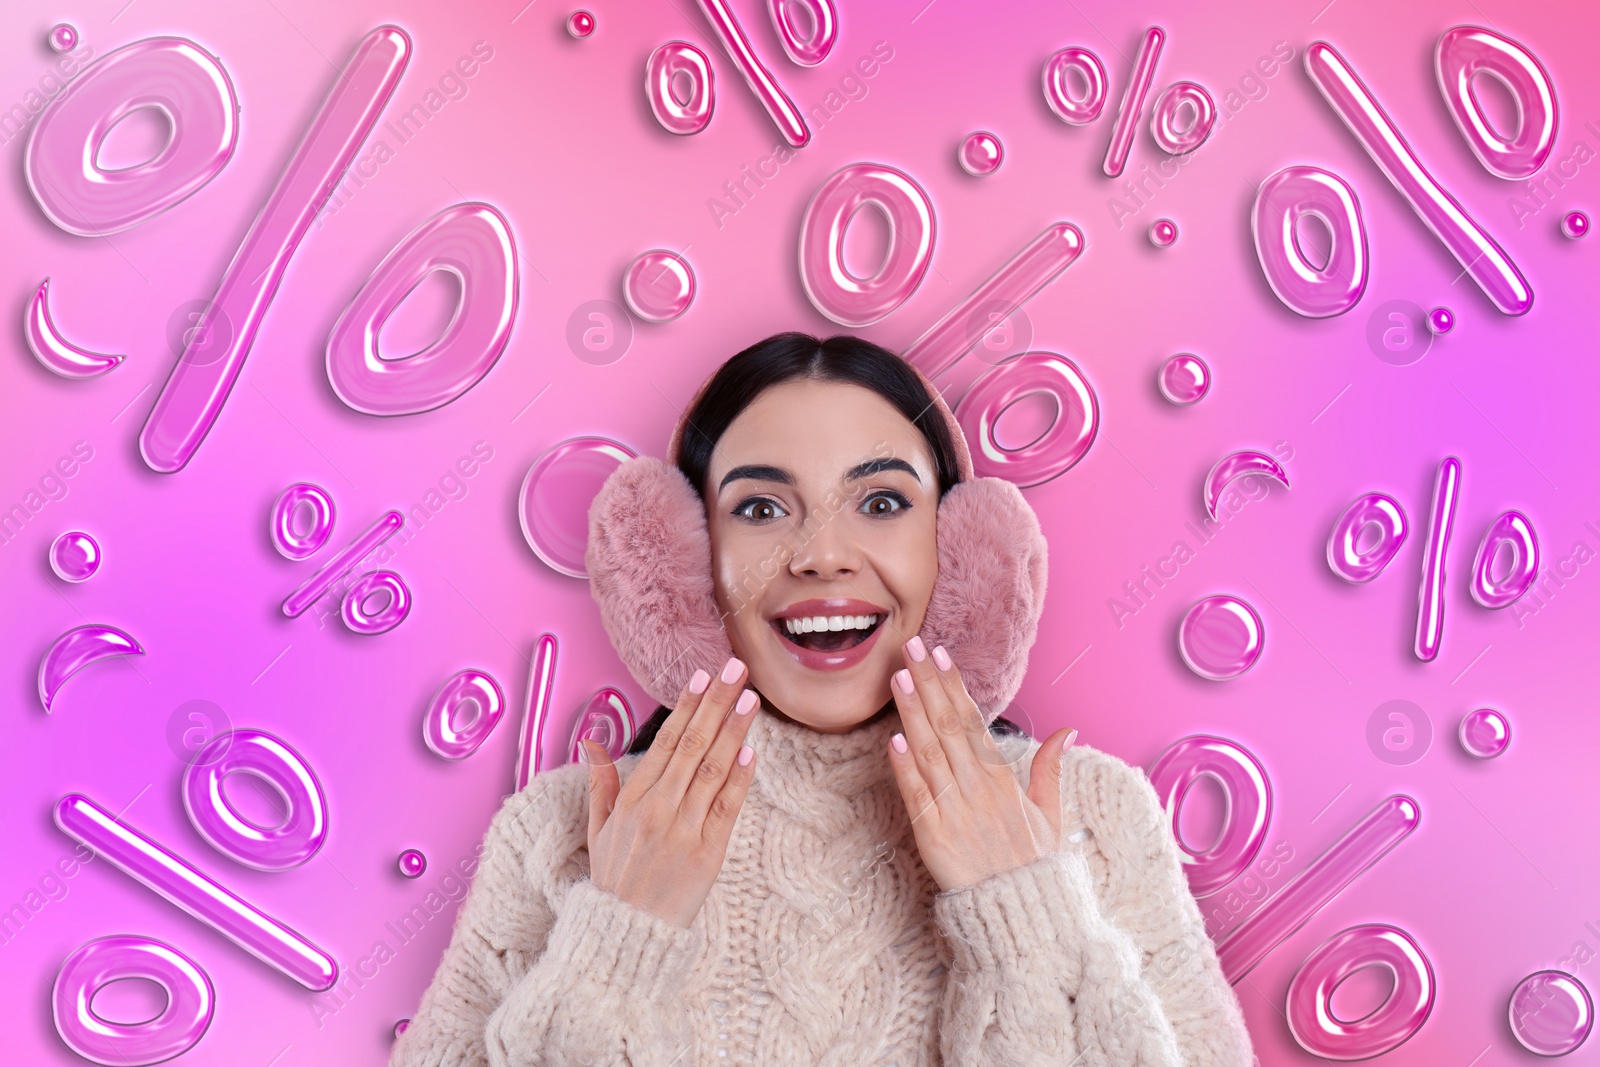 Image of Discount offer. Happy woman wearing earmuffs on pink background. Percent signs falling behind her